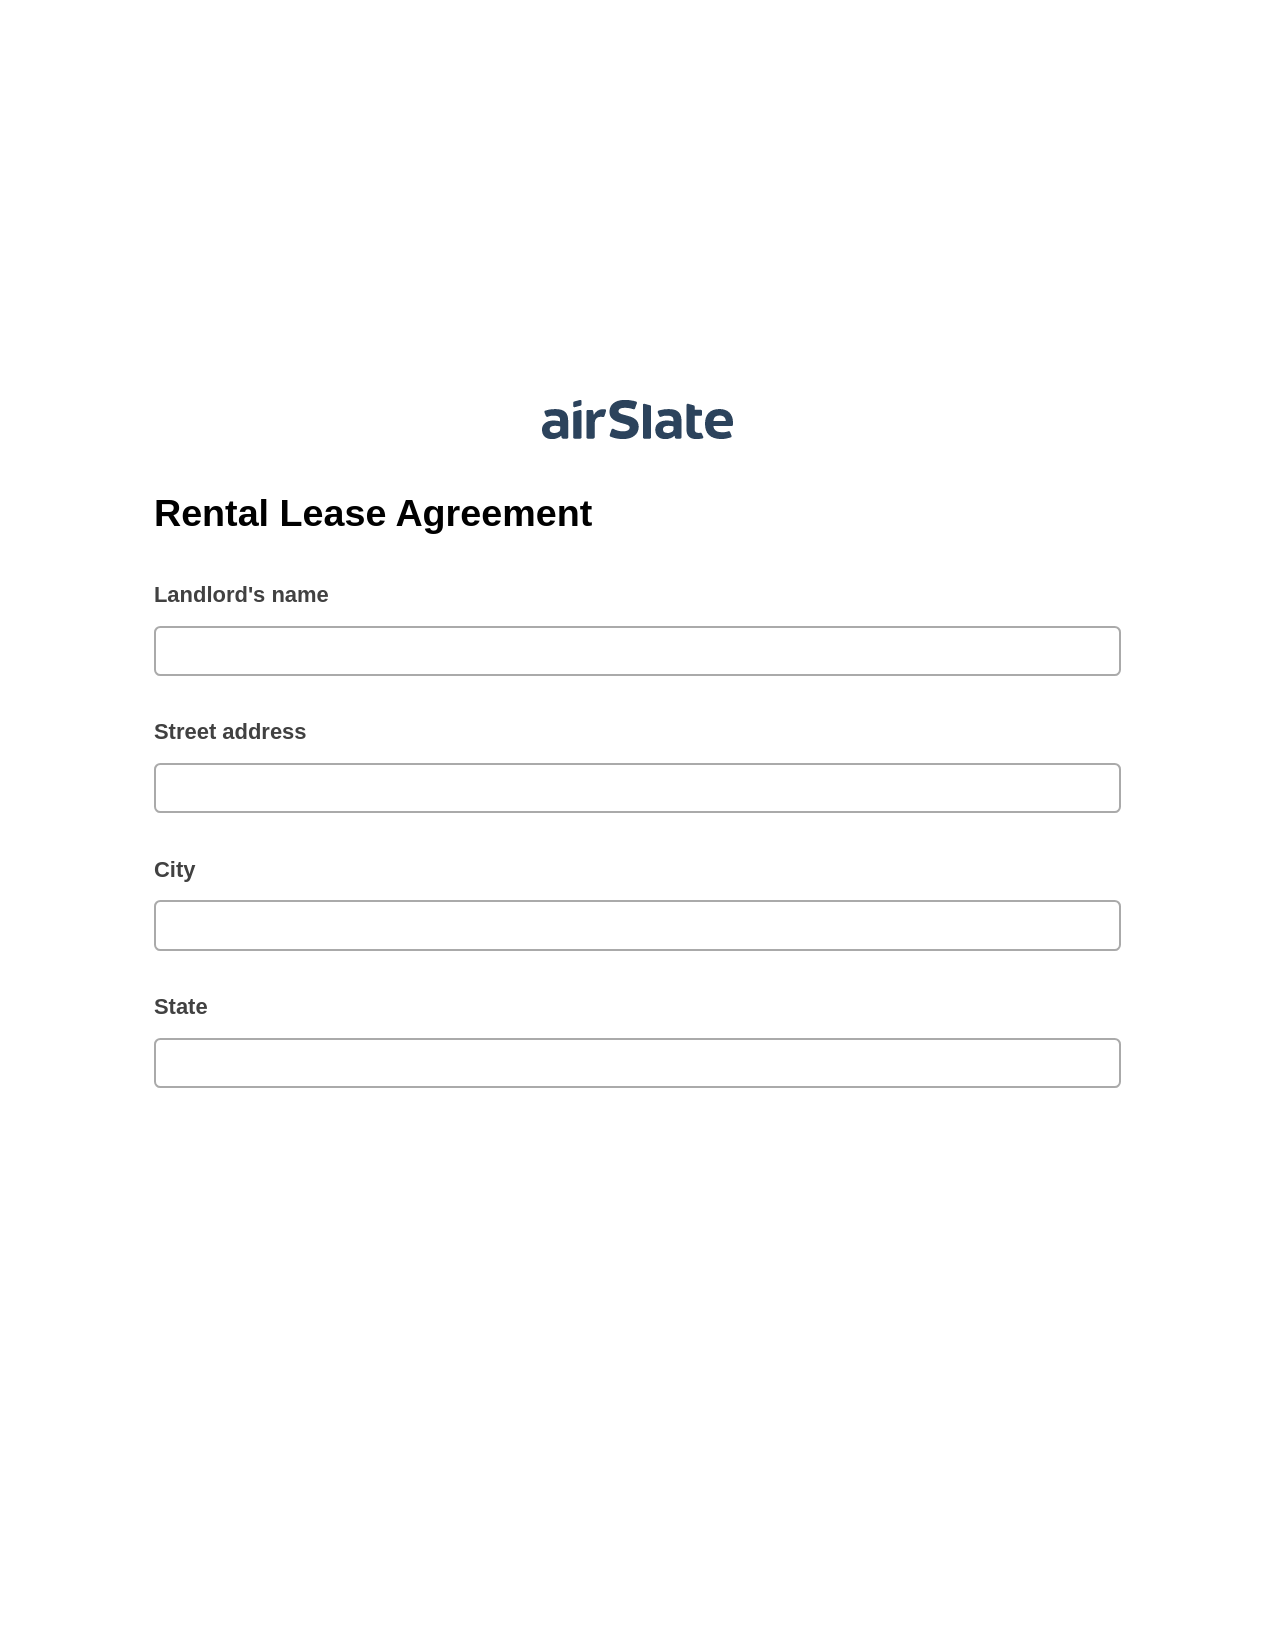 Rental Lease Agreement Pre-fill from another Slate Bot, Invoke Salesforce Process Bot, Export to NetSuite Record Bot